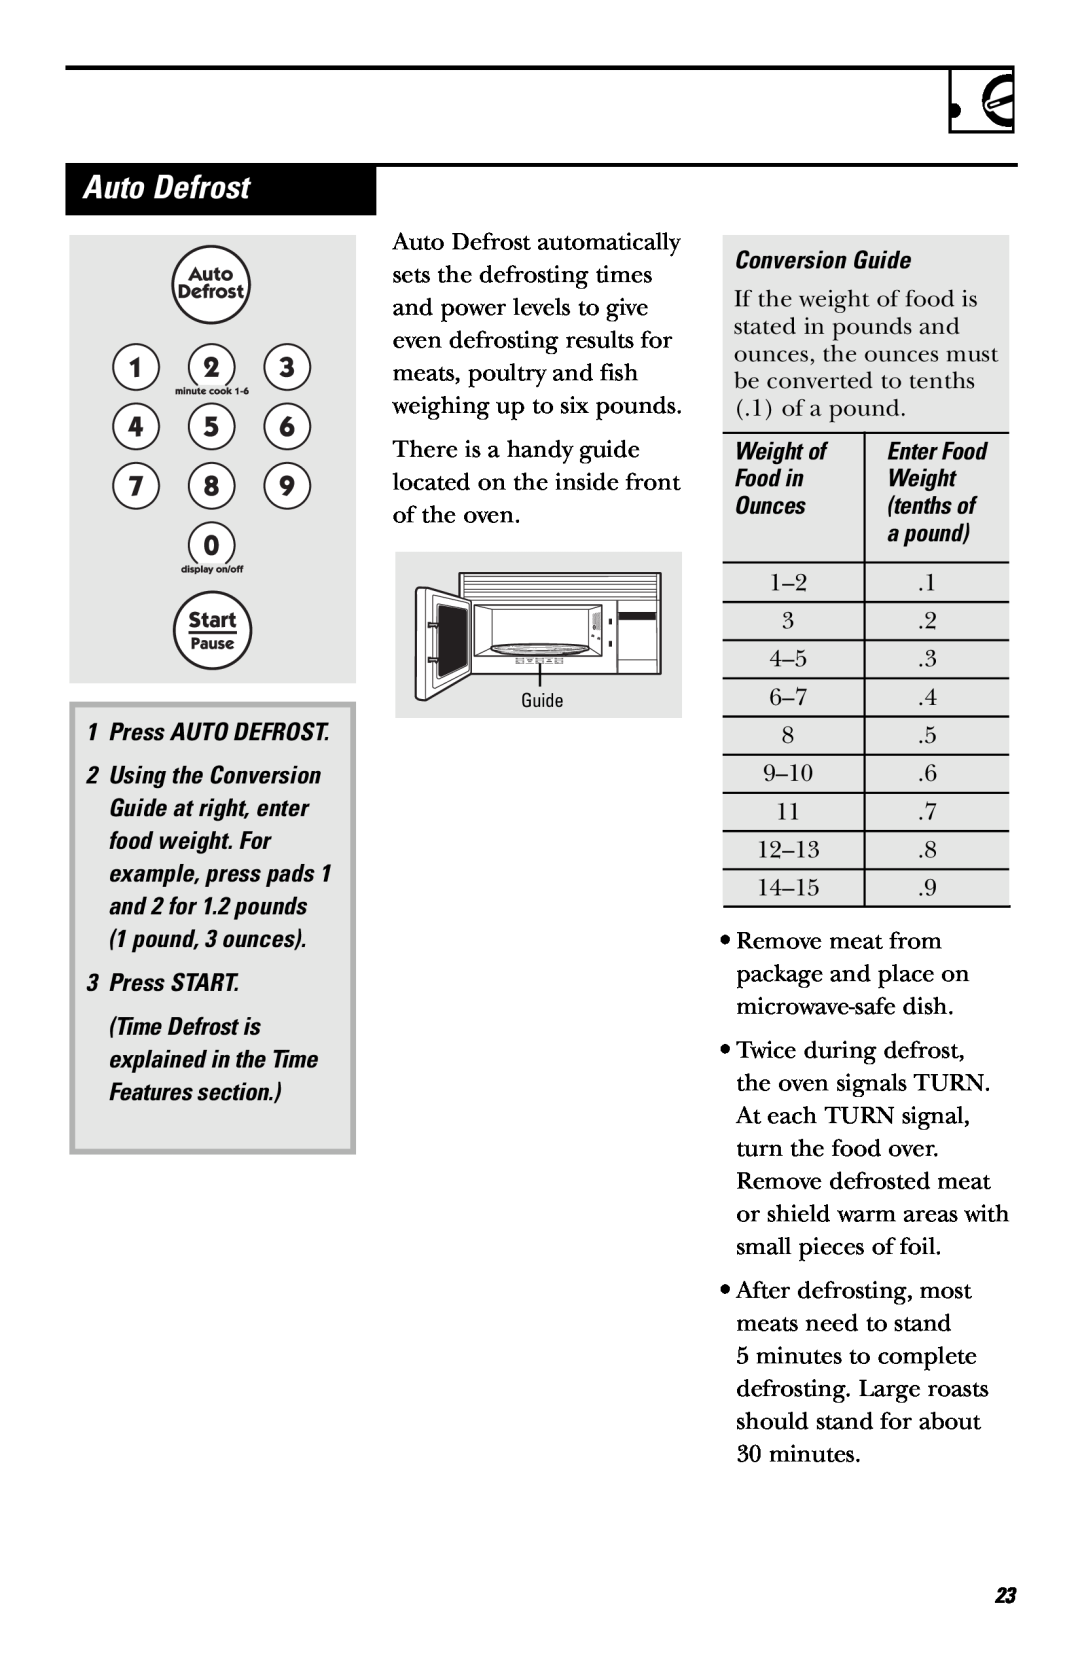 Hotpoint RVM1635 Auto Defrost, Press AUTO DEFROST, Press START, Conversion Guide, Weight of, Food in, Ounces, tenths of 